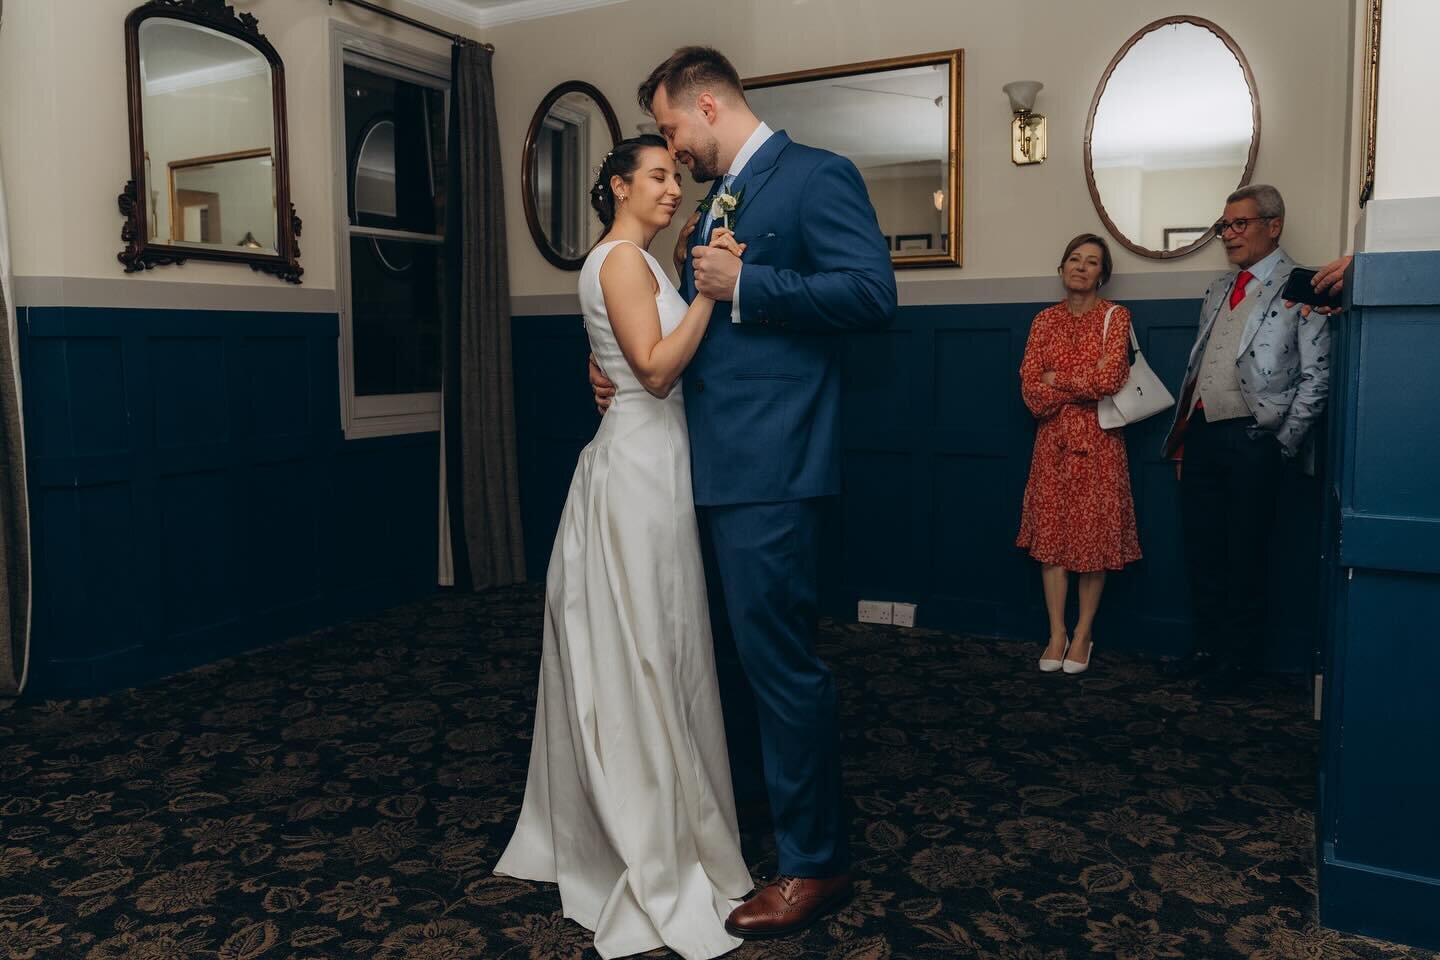 Swipe to see this couple go from their first dance to full-on party mode! 😍 

There&rsquo;s nothing quite like capturing all the giggles, grooves, and genuine love vibes that light up the night. Being part of this day, snapping away these joyful mom